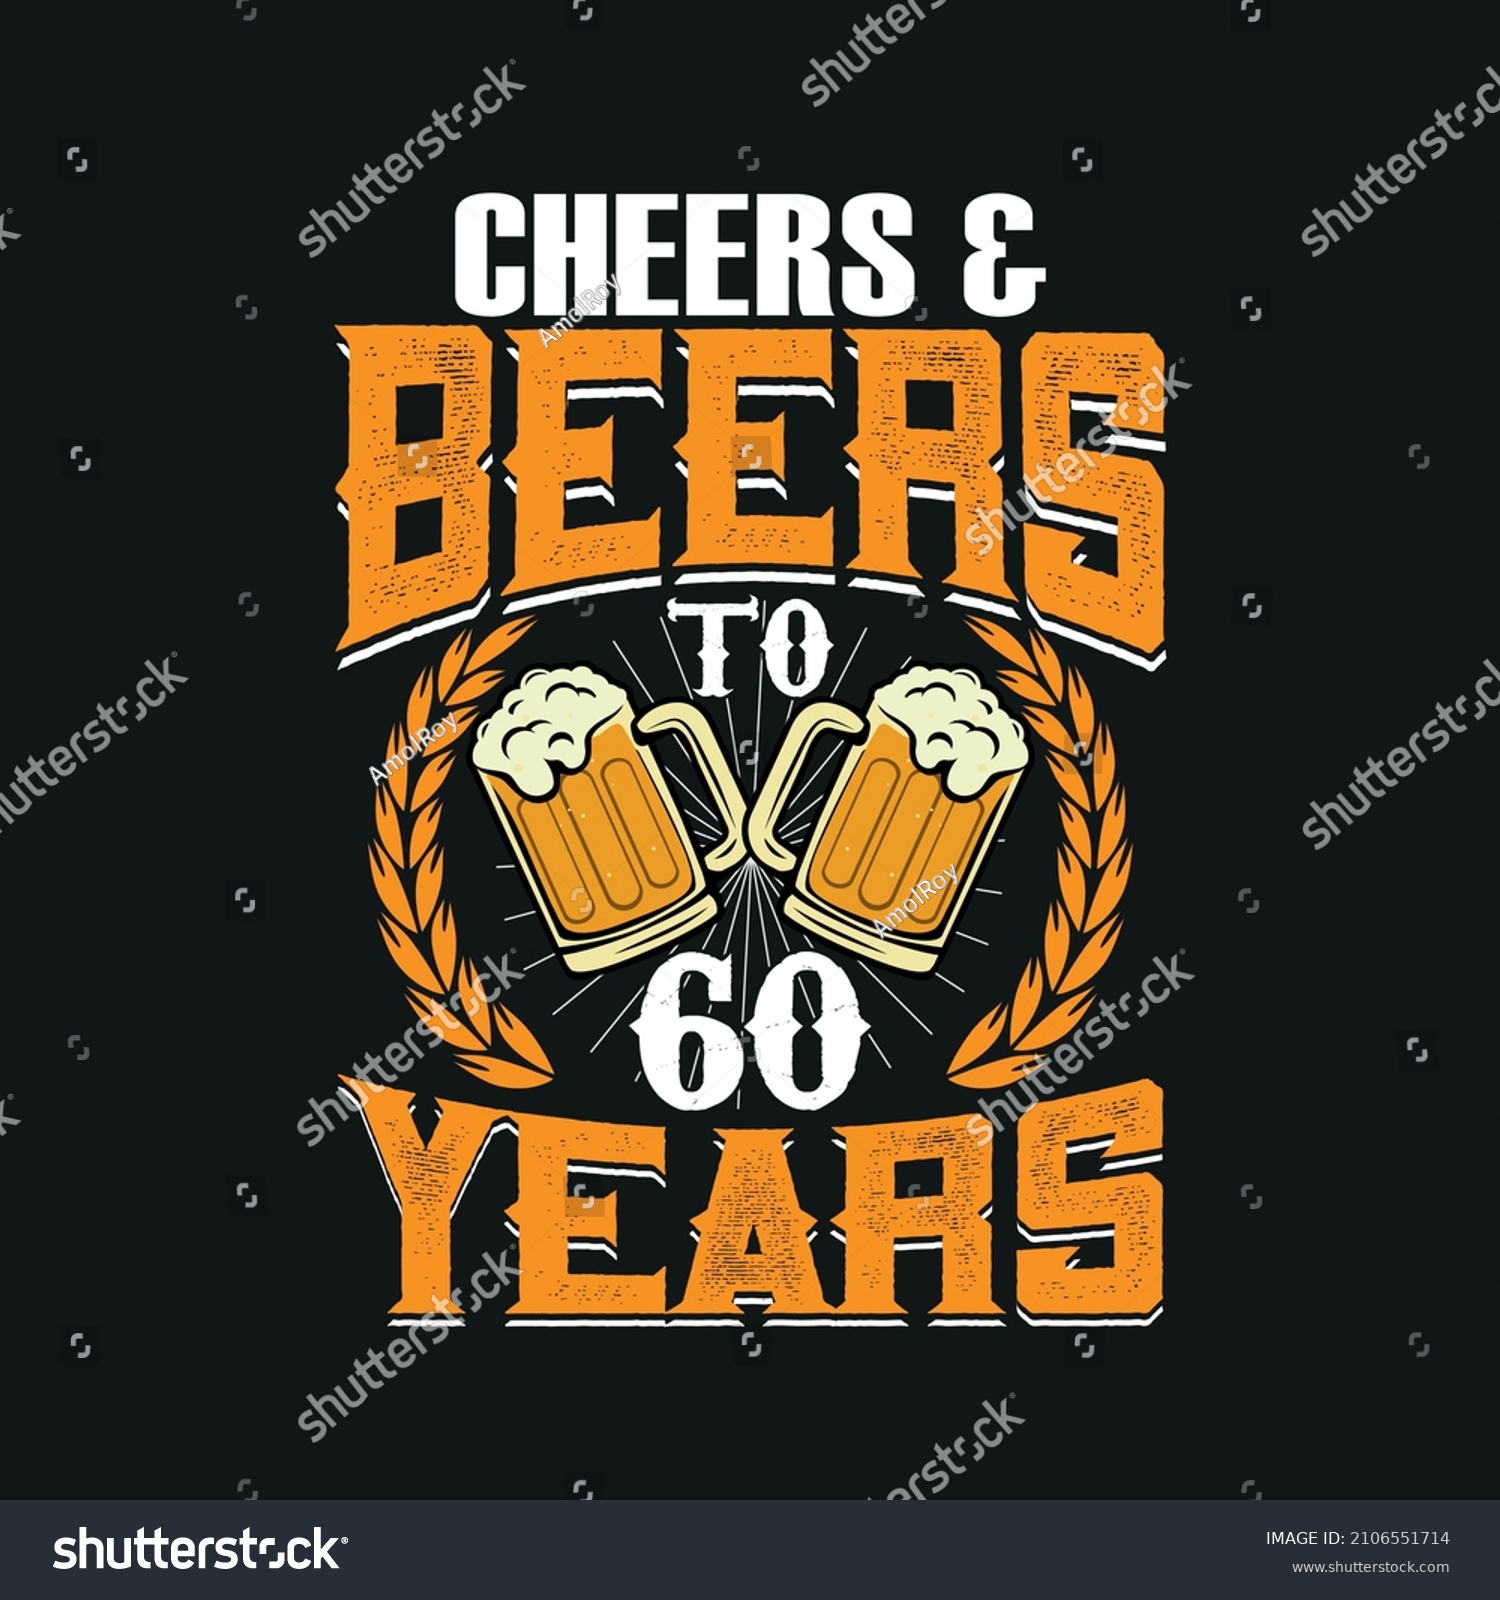 SVG of Cheers And Beers To 60 Years vintage 60 years Birthday design vector illustration eps svg